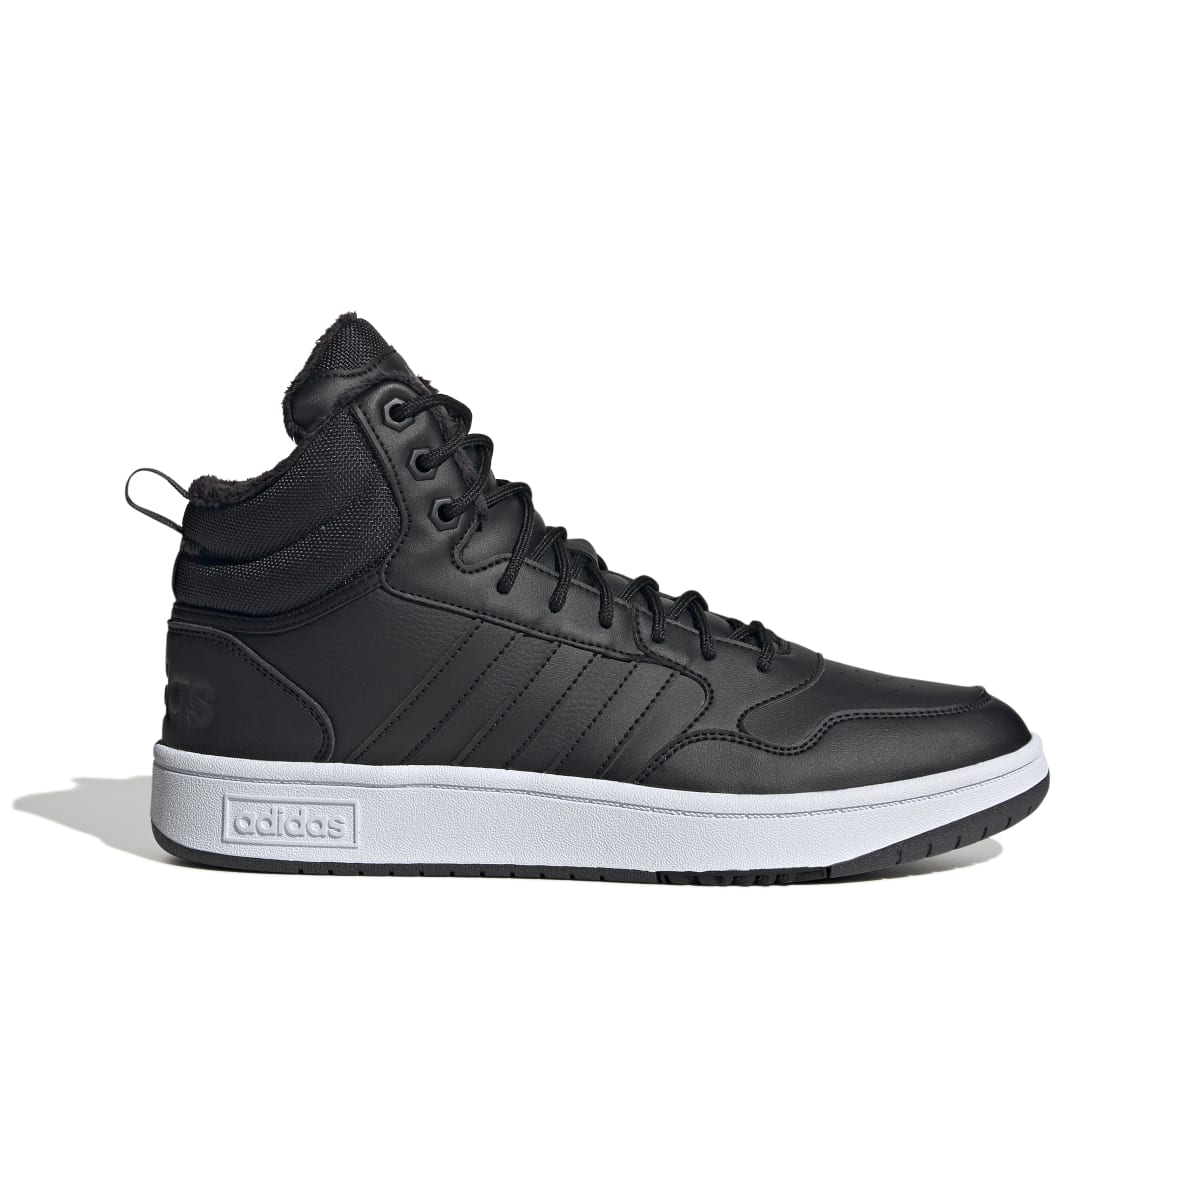 ADIDAS GZ6679 HOOPS MID 3.0 WINTERIZED MN'S (Medium) Black/Black/White Synthetic Leather Basketball Shoes